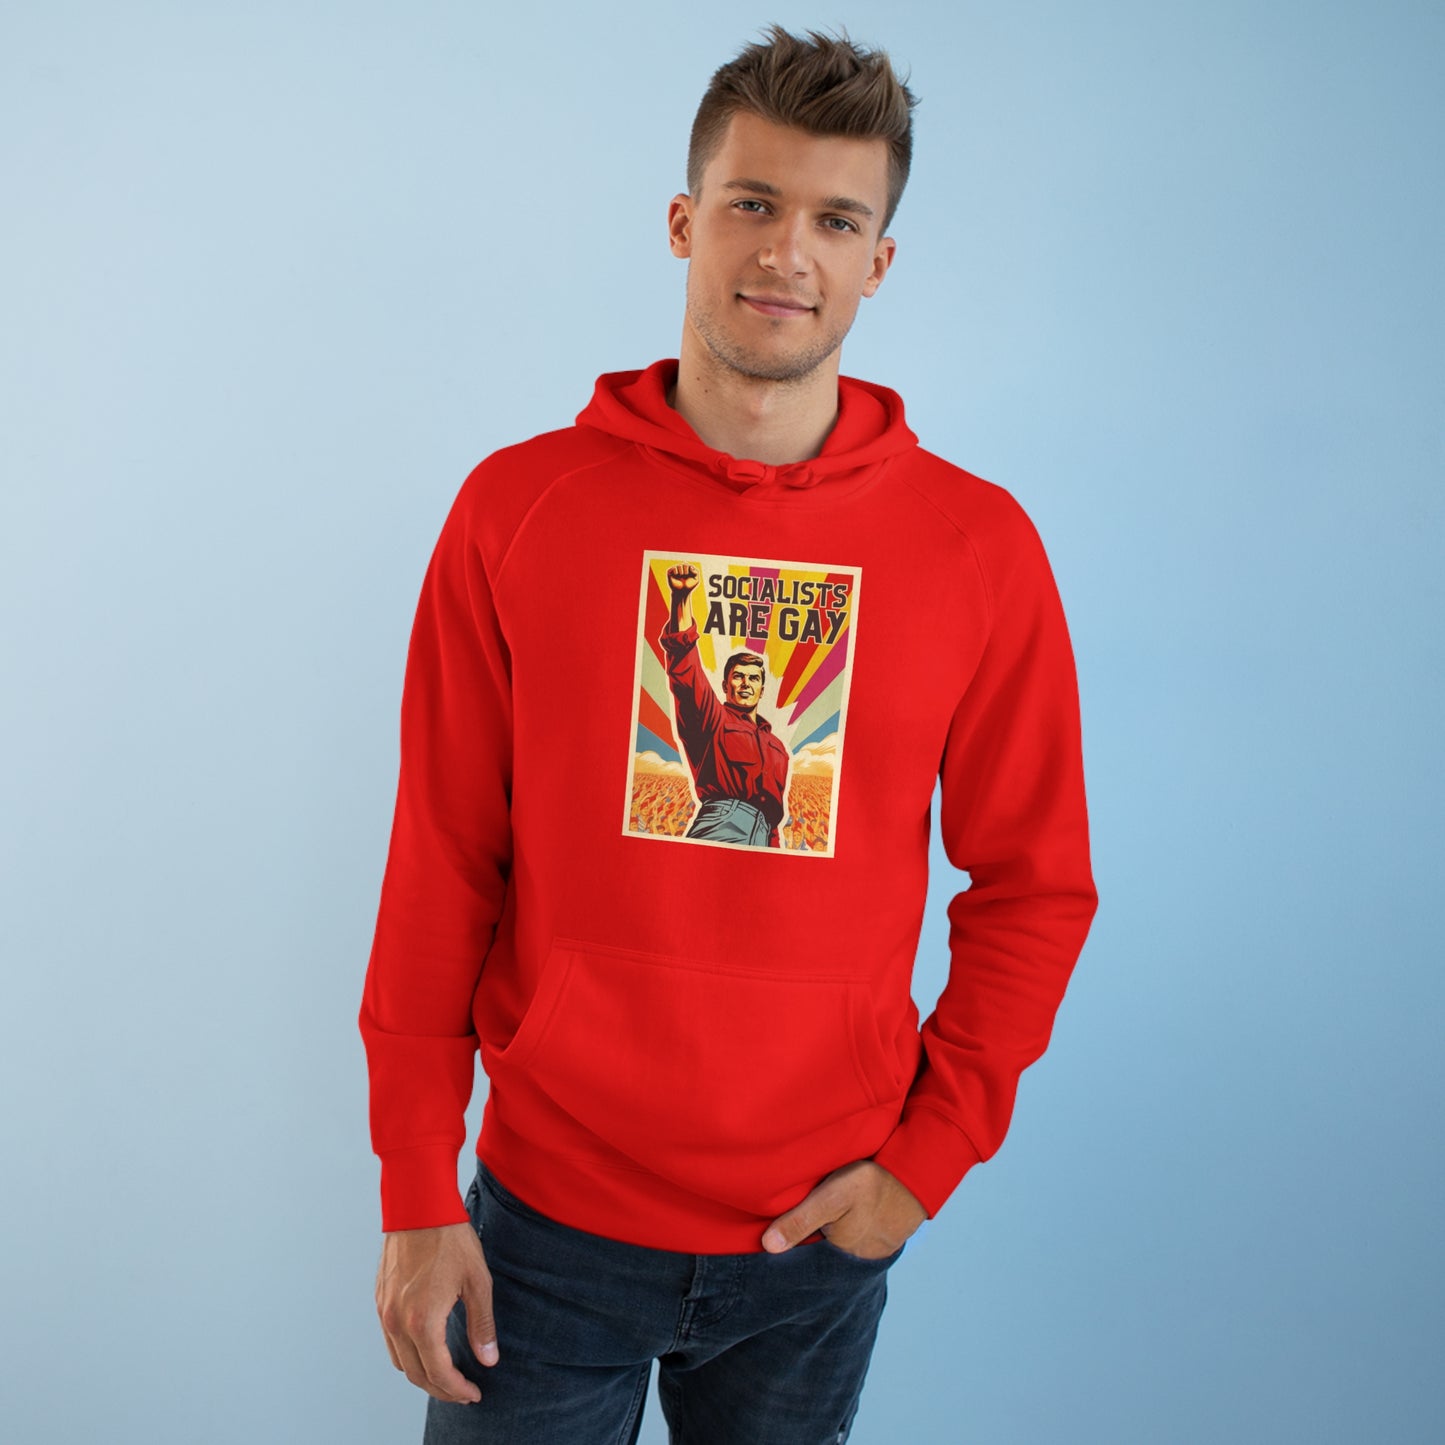 Socialists Are Gay Unisex Supply Hoodie